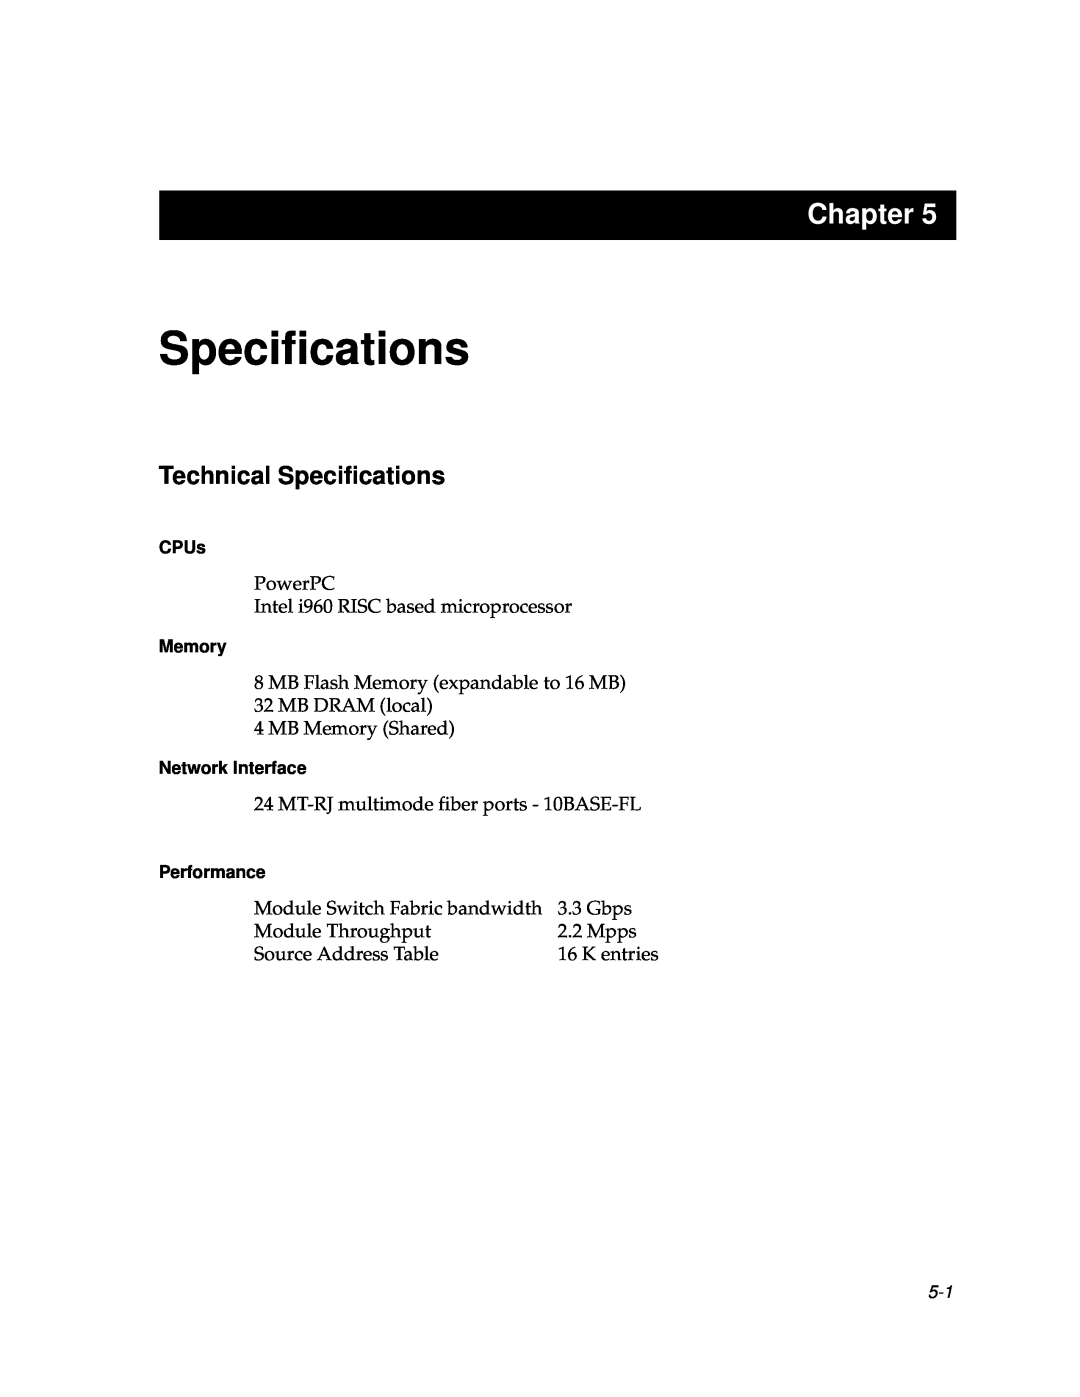 Cabletron Systems 9F125-0, 9F120-08, 9F122-12 manual Technical Specifications, Chapter 